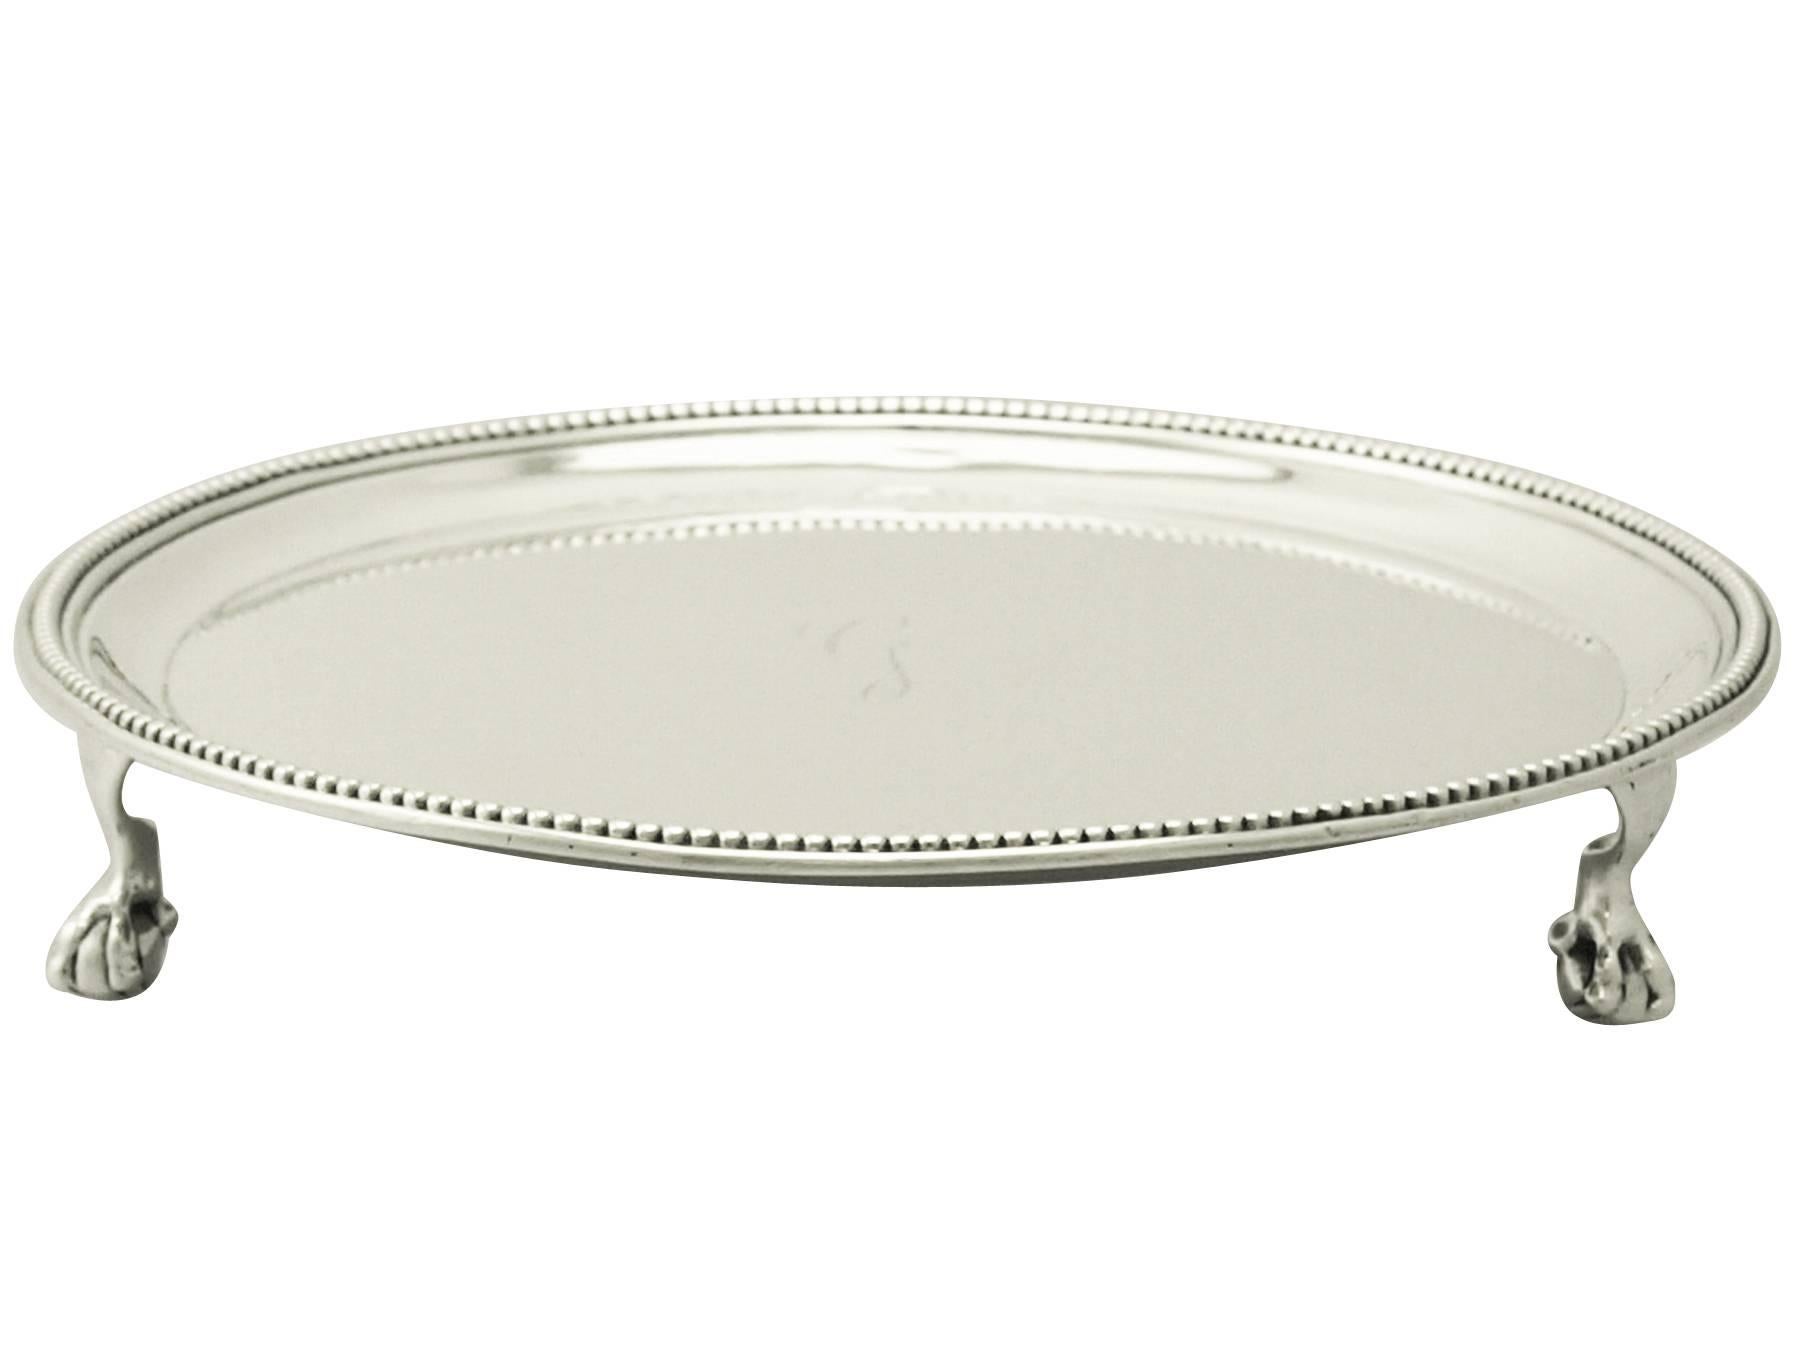 A fine and impressive antique Georgian English sterling silver waiter; an addition to our dining silverware collection.

This fine antique George III sterling silver waiter has a plain circular form.

The surface of this waiter is embellished